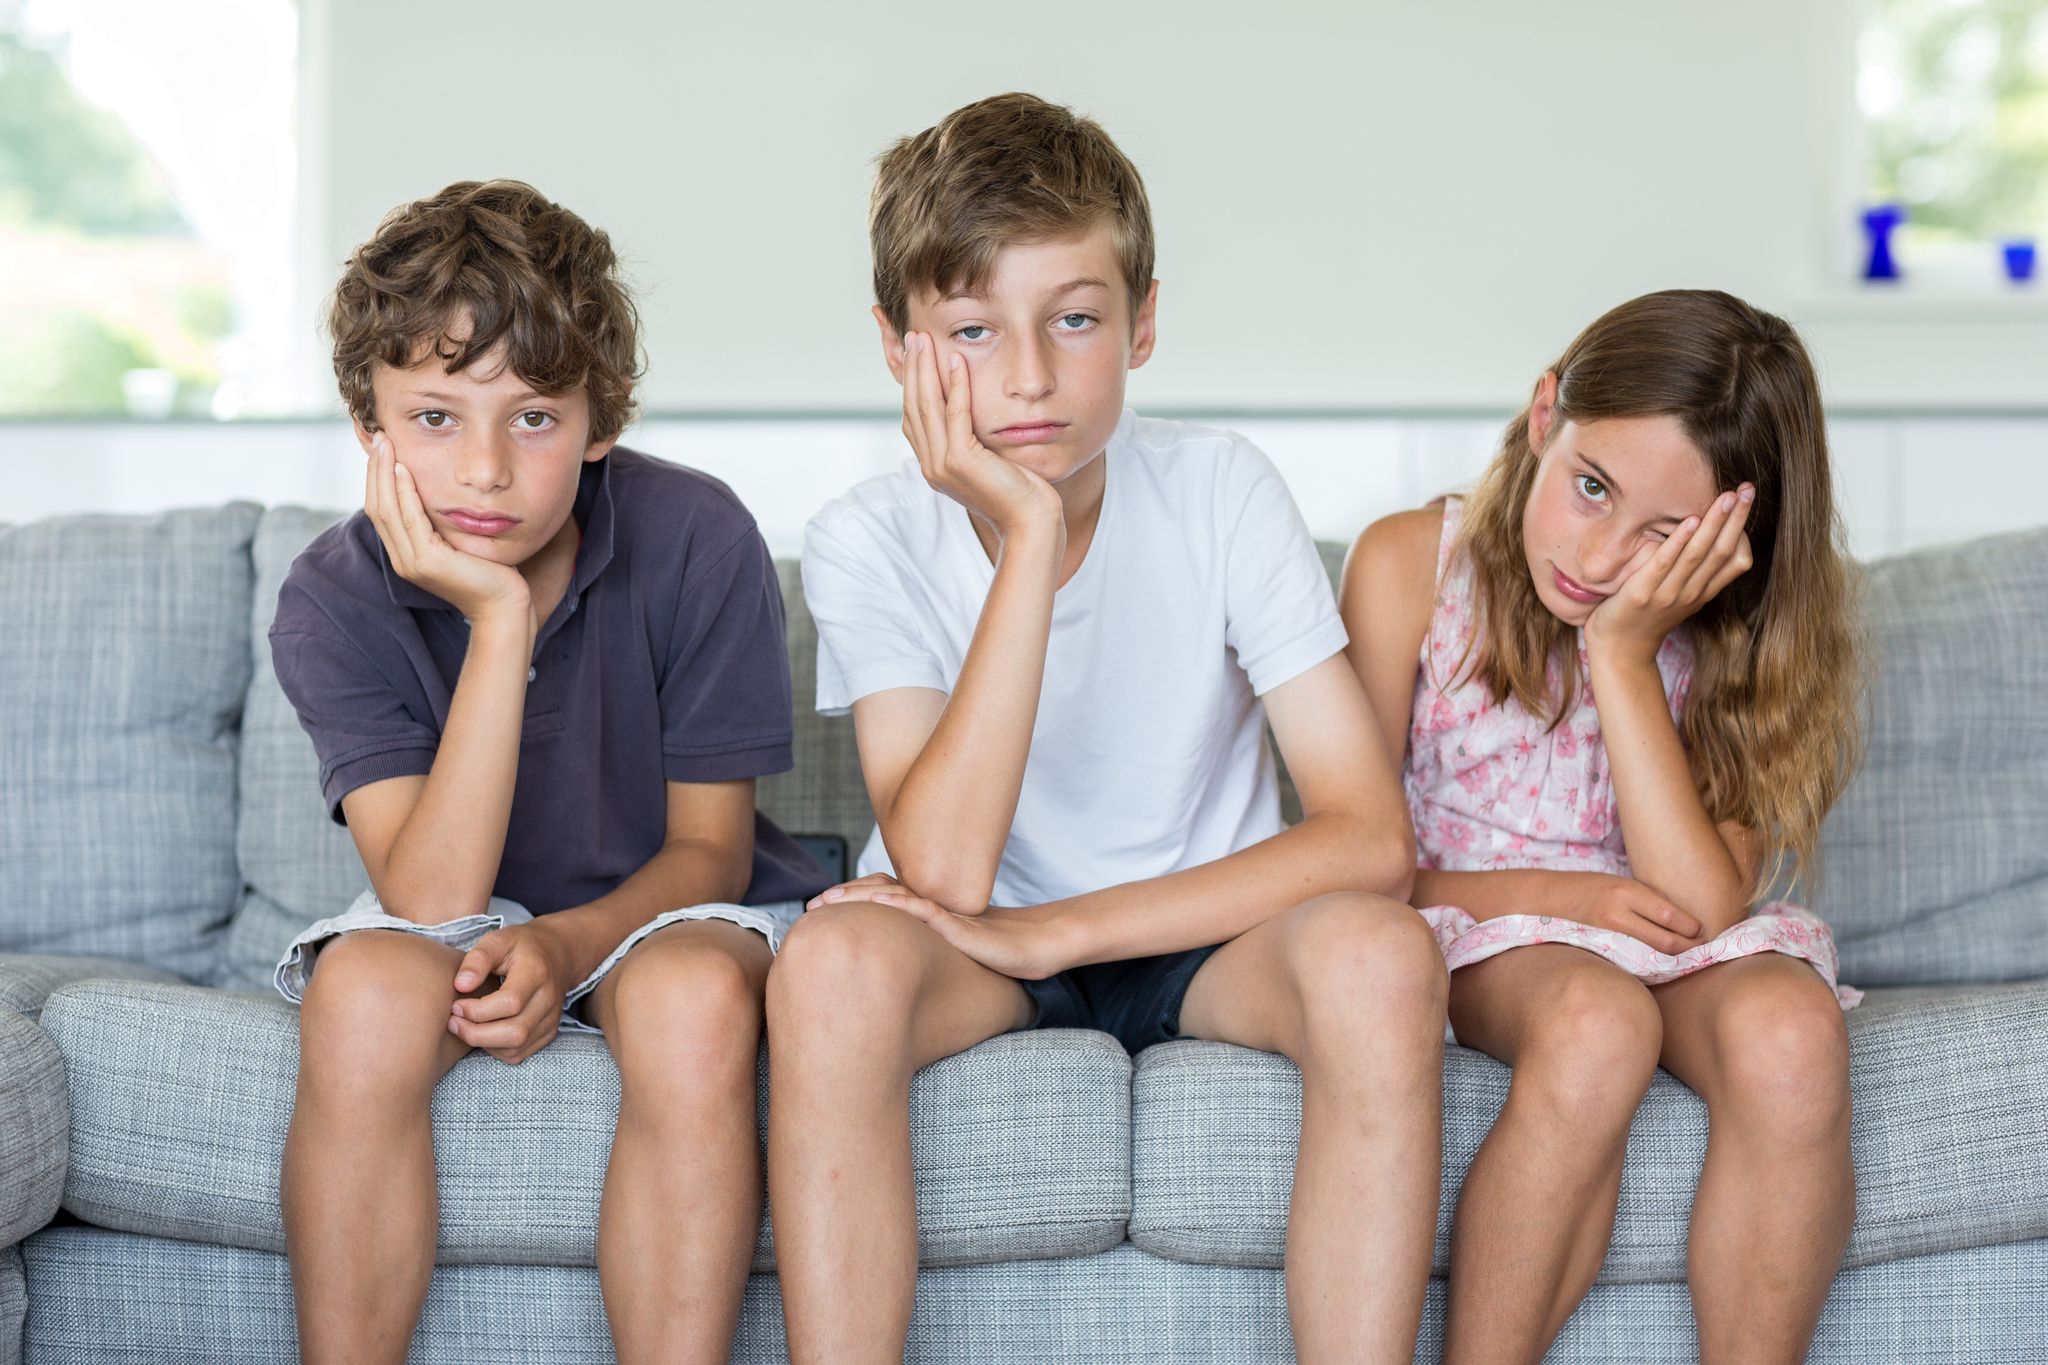 Three children looking bored. | Source: Getty Images